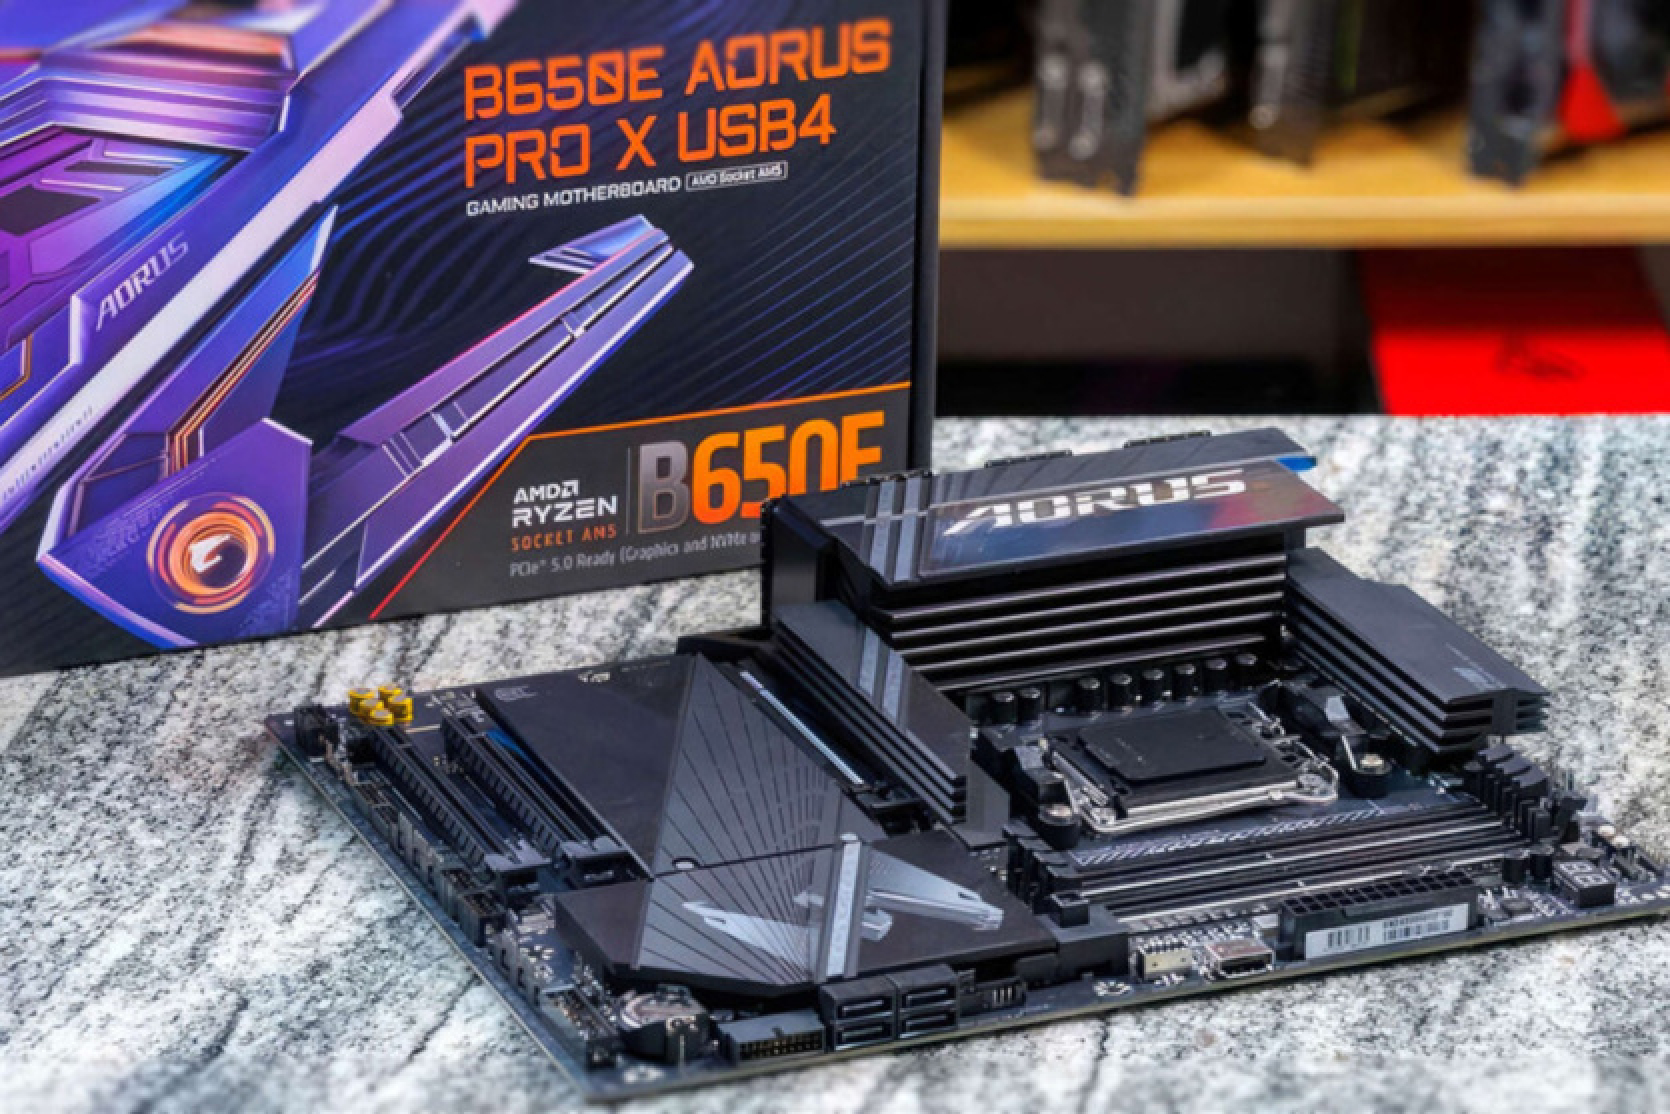 Ready for NVIDIA RTX 5090: Gigabyte's new motherboard can handle graphics cards weighing up to 58 lbs.